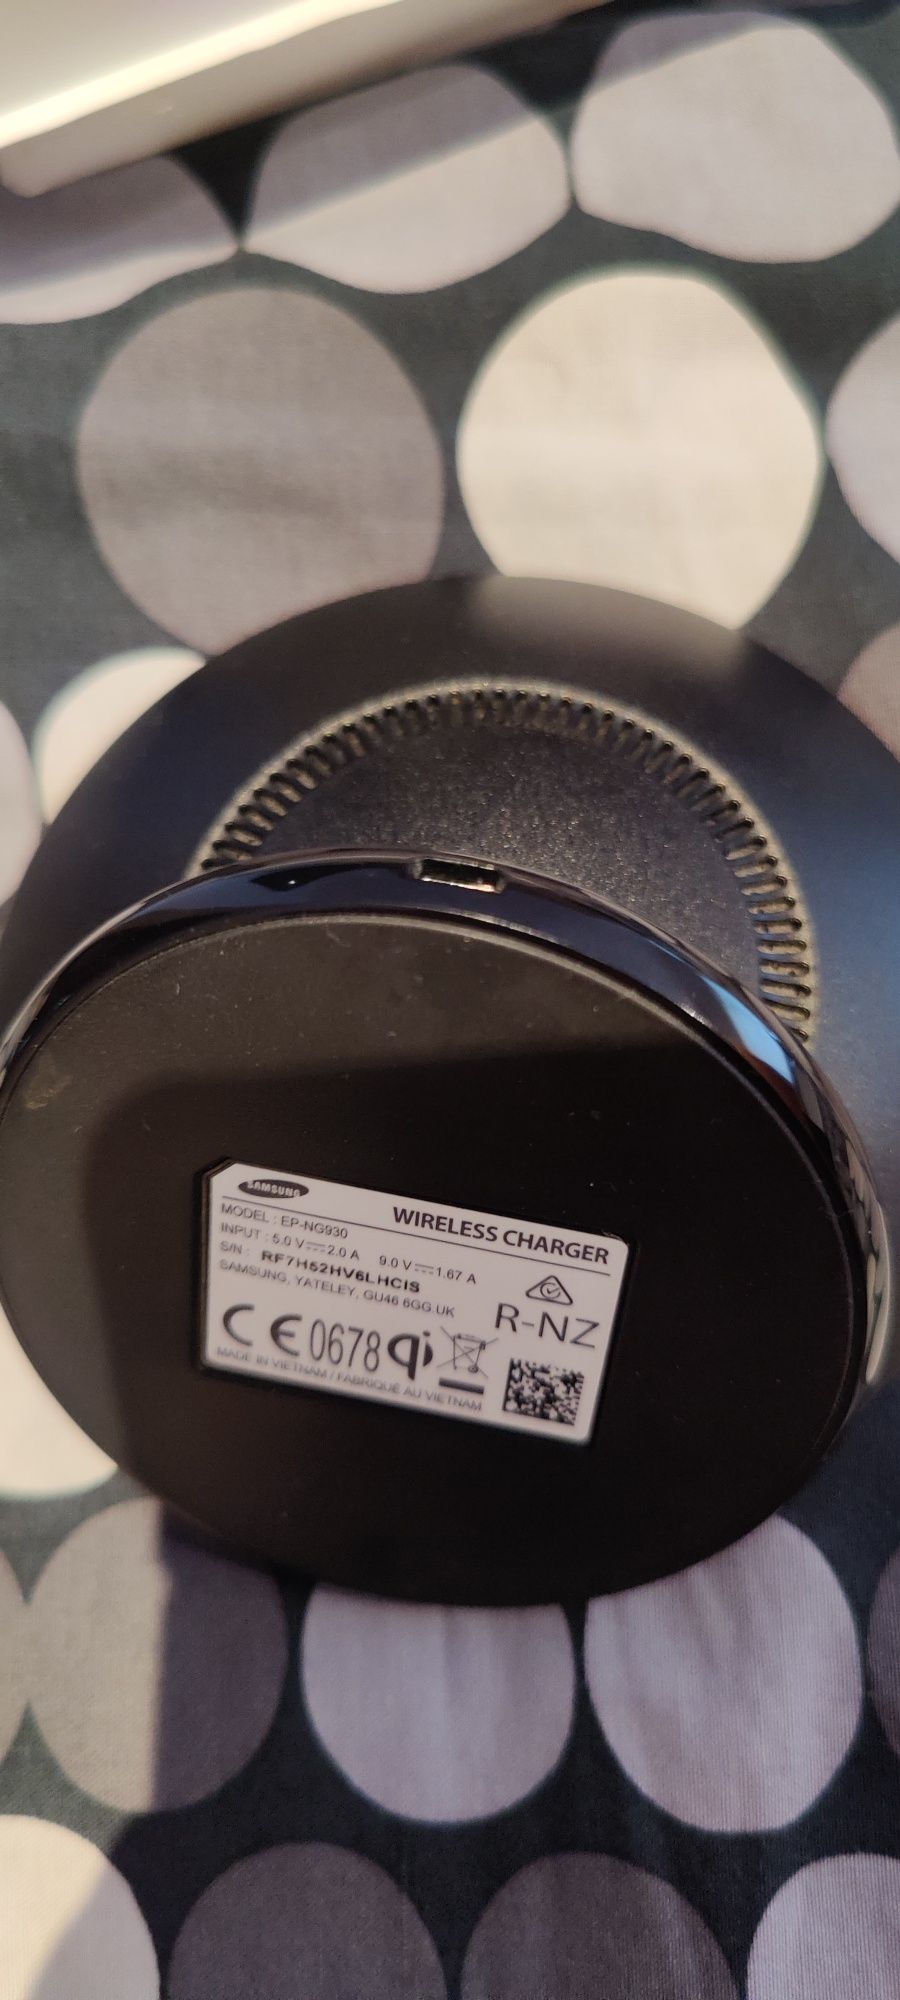 Samsung Wireless charger fast charge